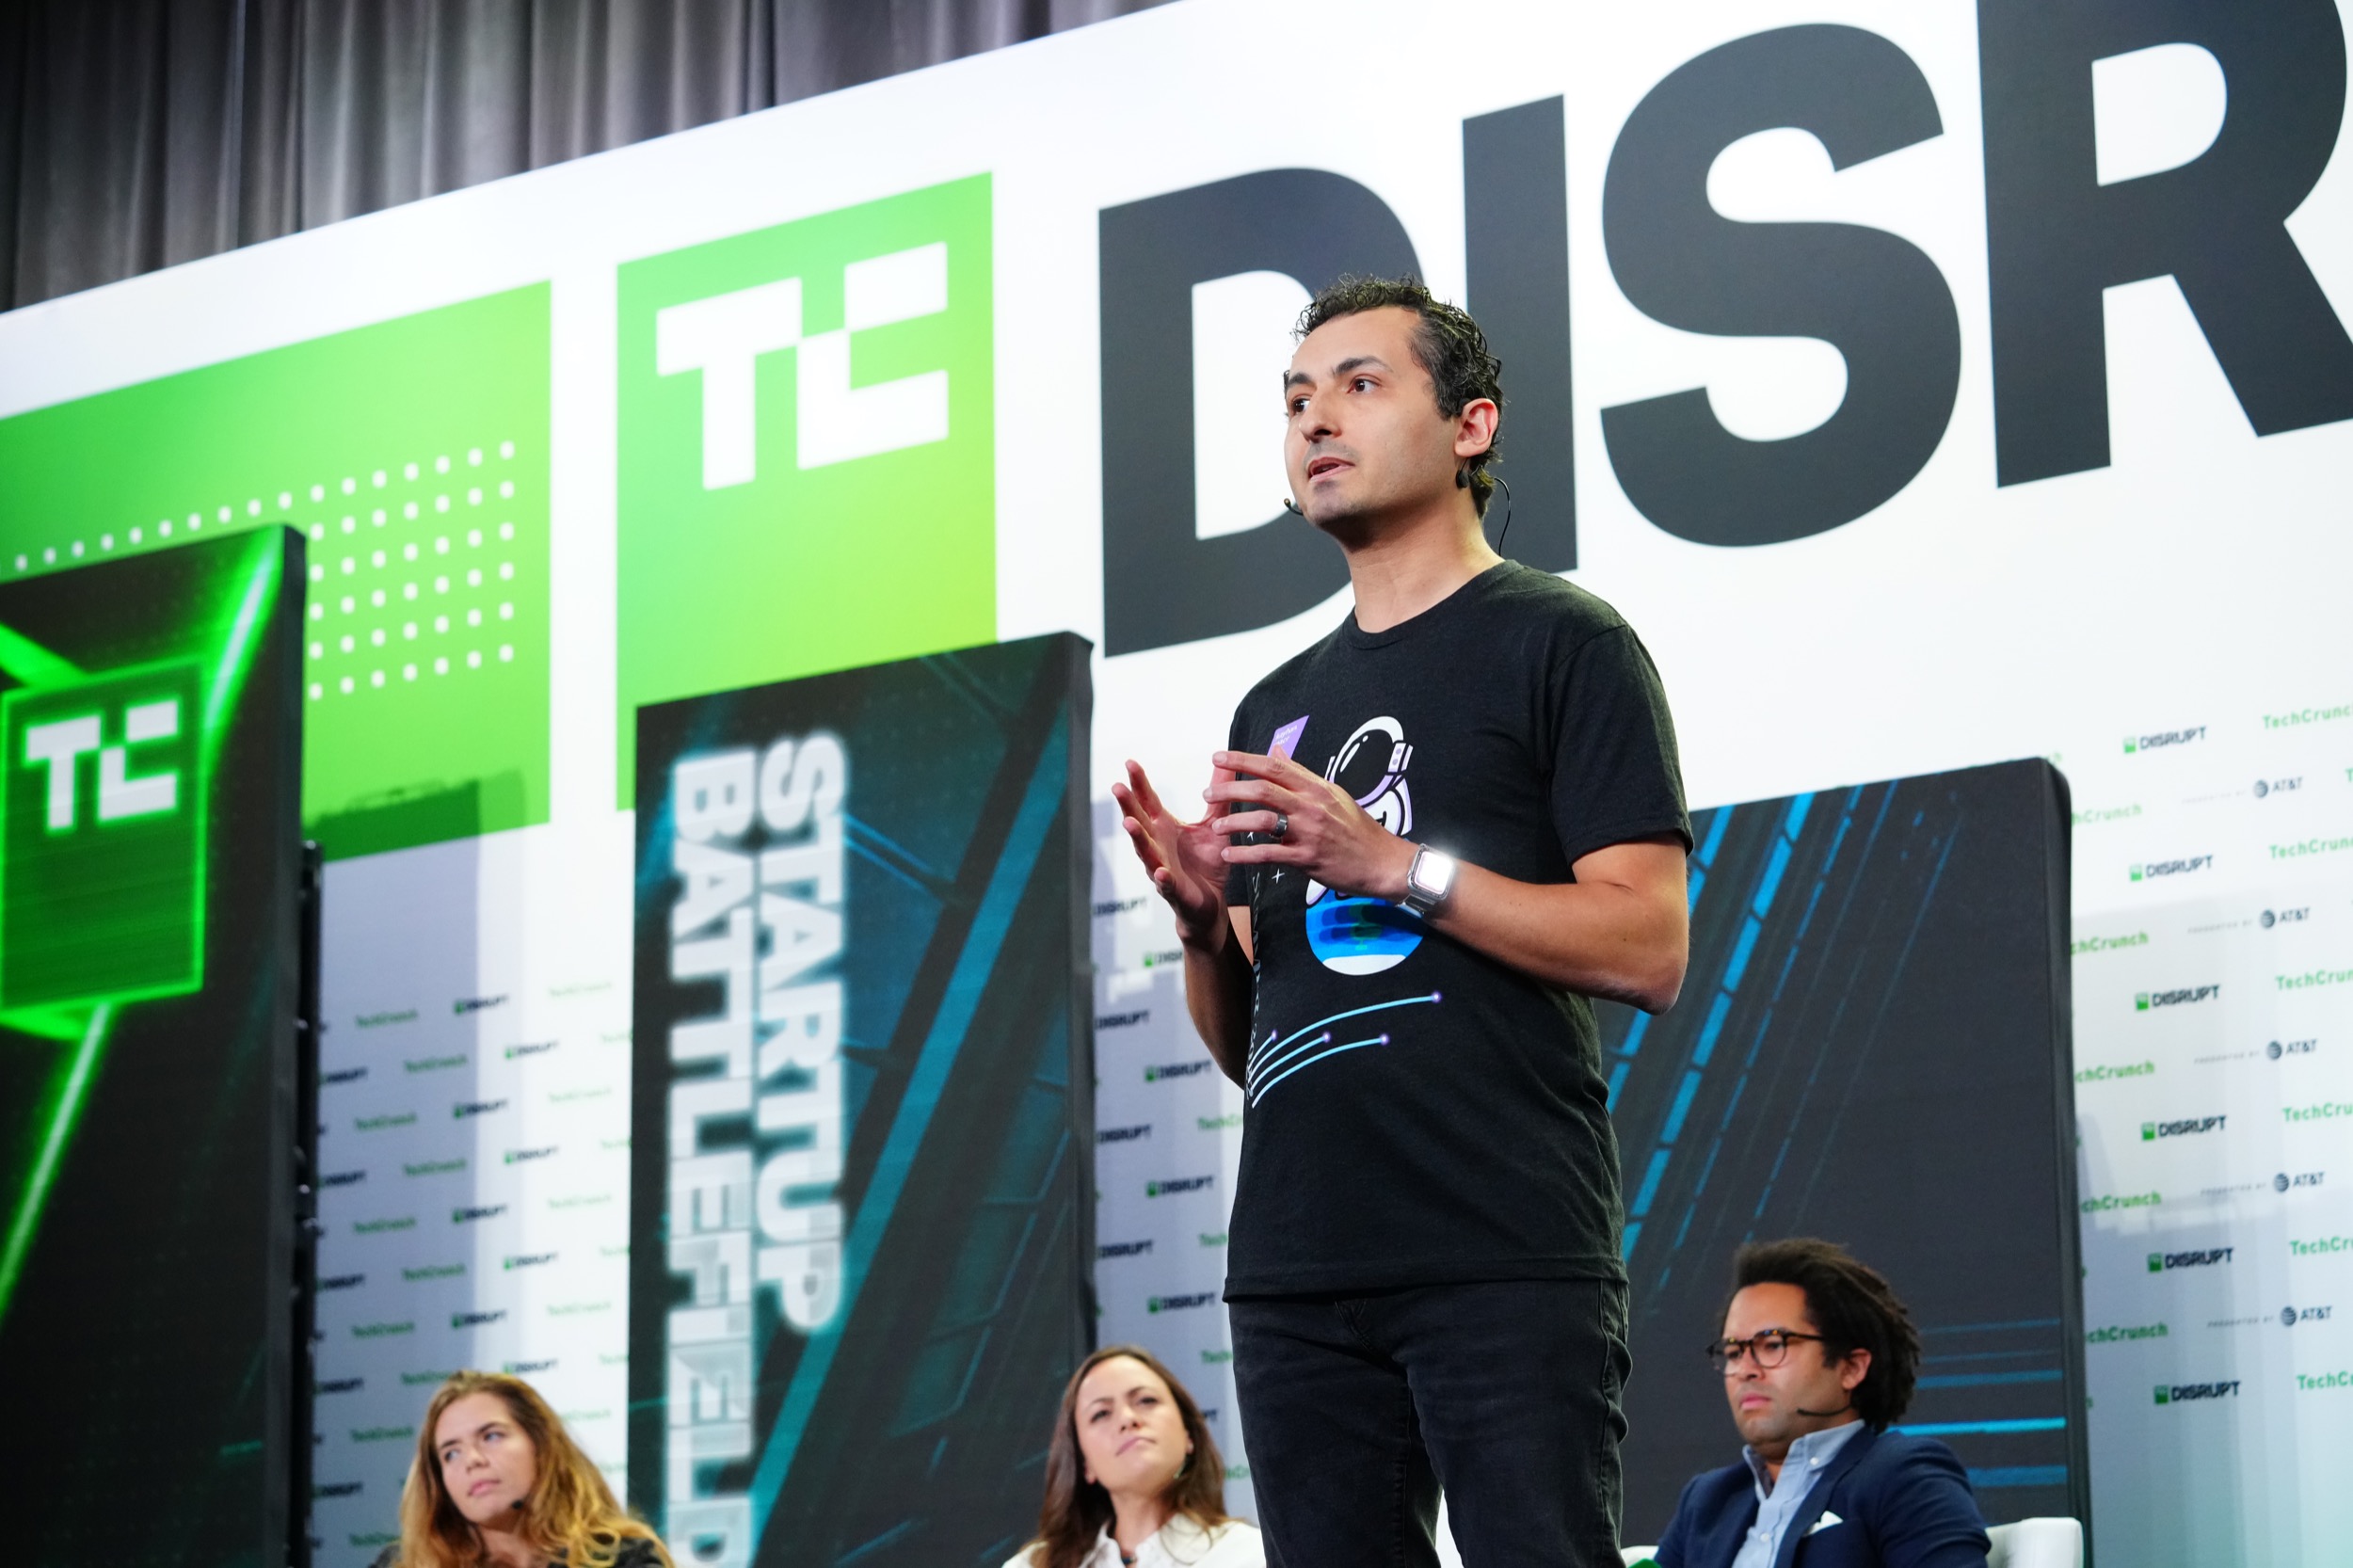 Kayhan Space pitches in Startup Battlefield at TechCrunch Disrupt in San Francisco on October 19, 2022. Image Credit: Darrell Etherington / TechCrunch